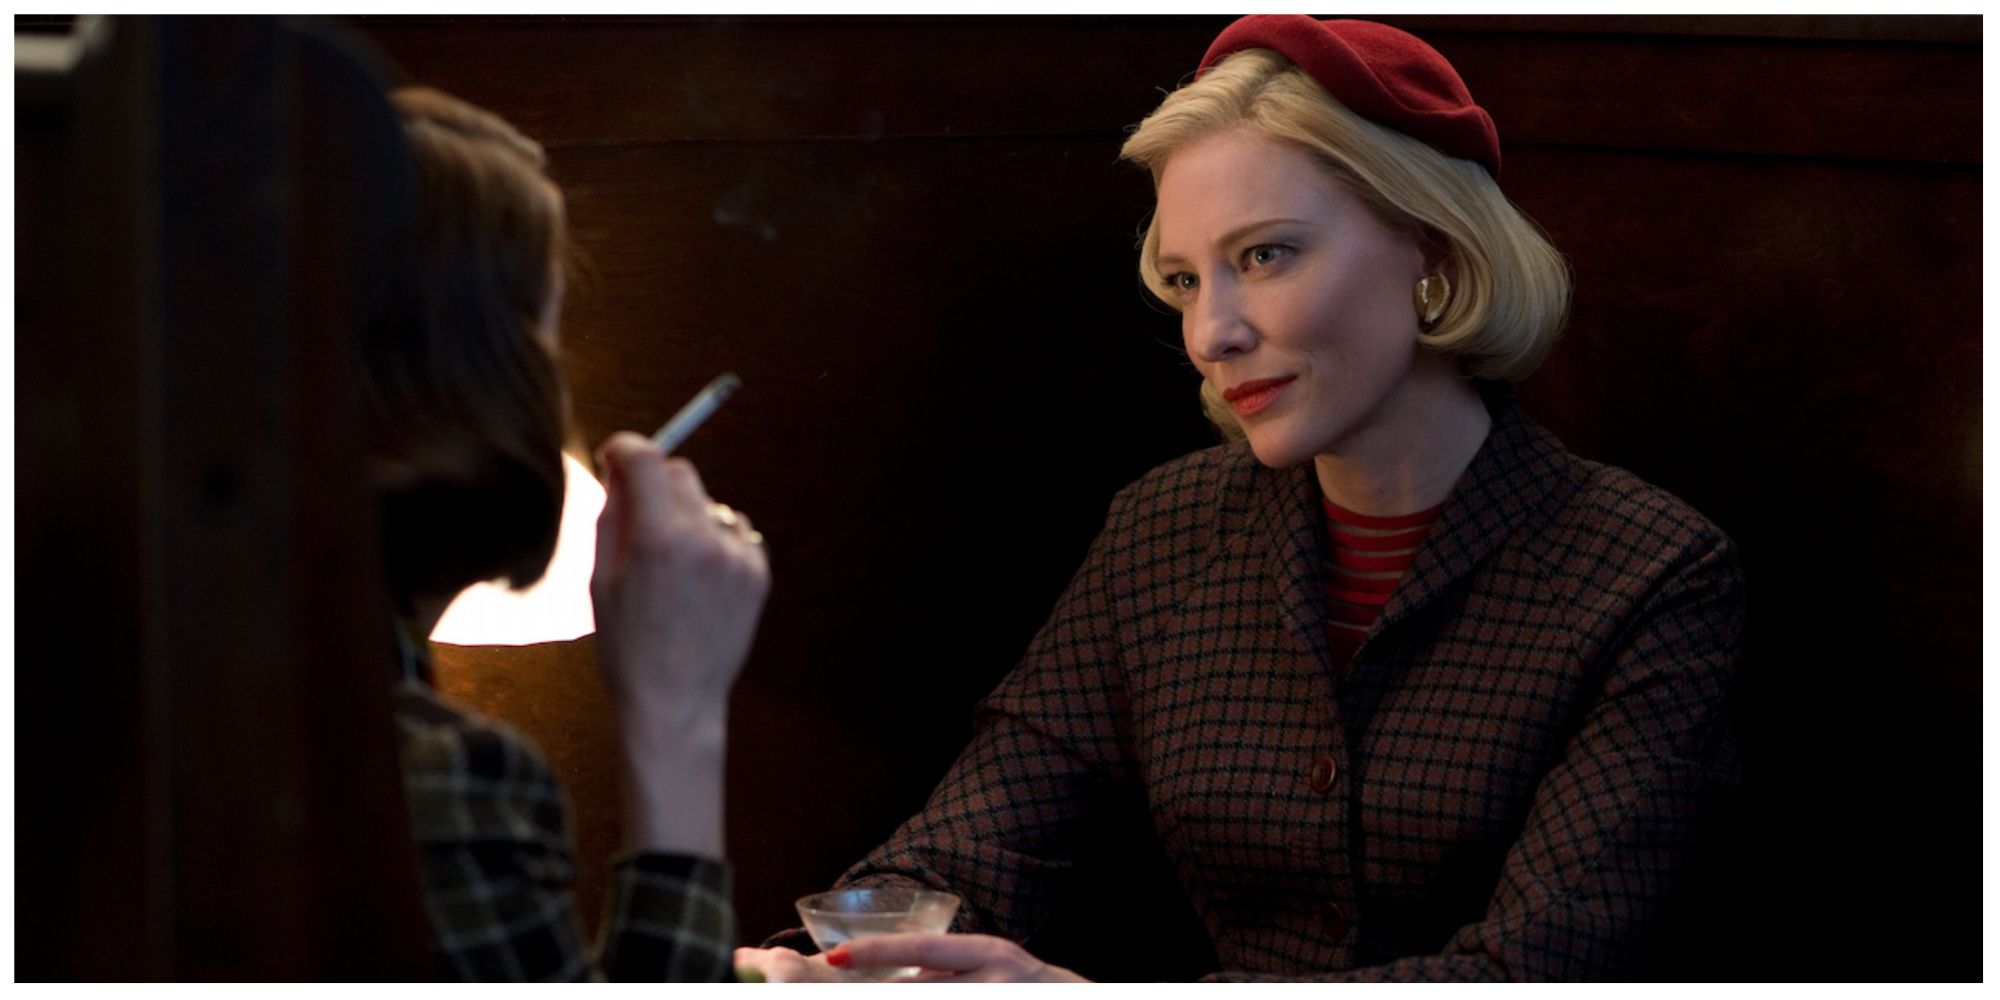 Blanchett as Carol looking and smiling at her friend at lunch.